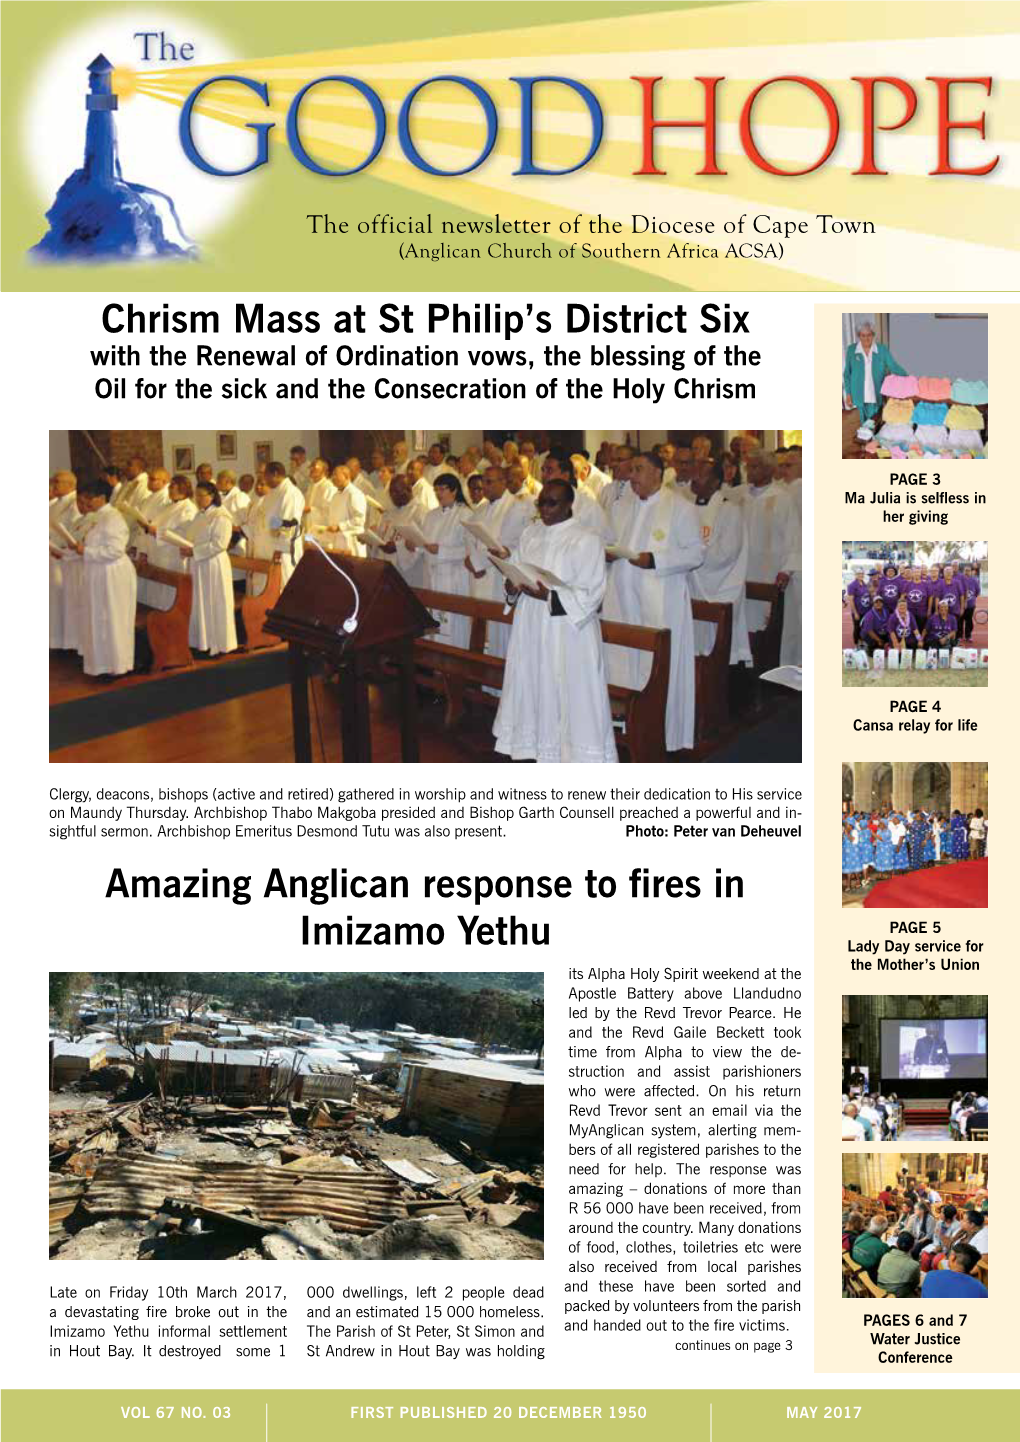 Chrism Mass at St Philip's District Six Amazing Anglican Response to Fires